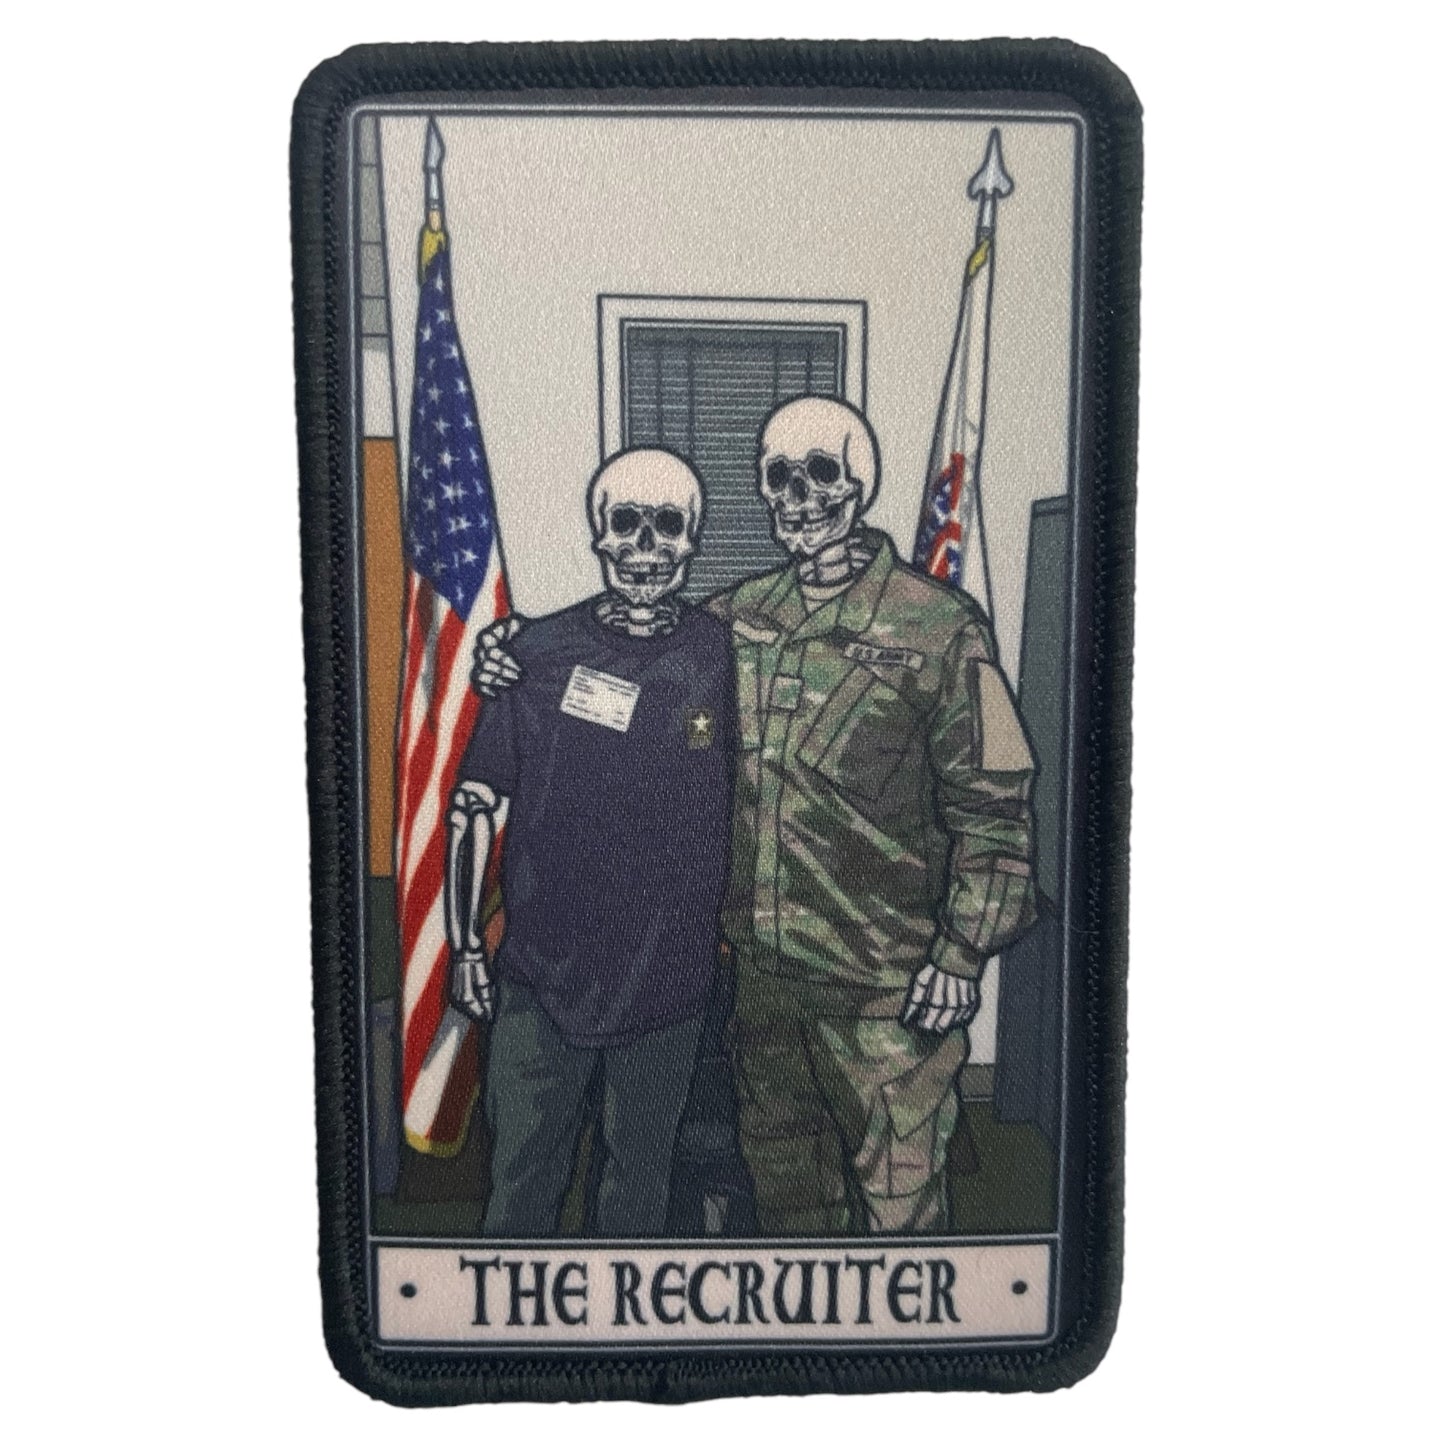 Recruiter Patch